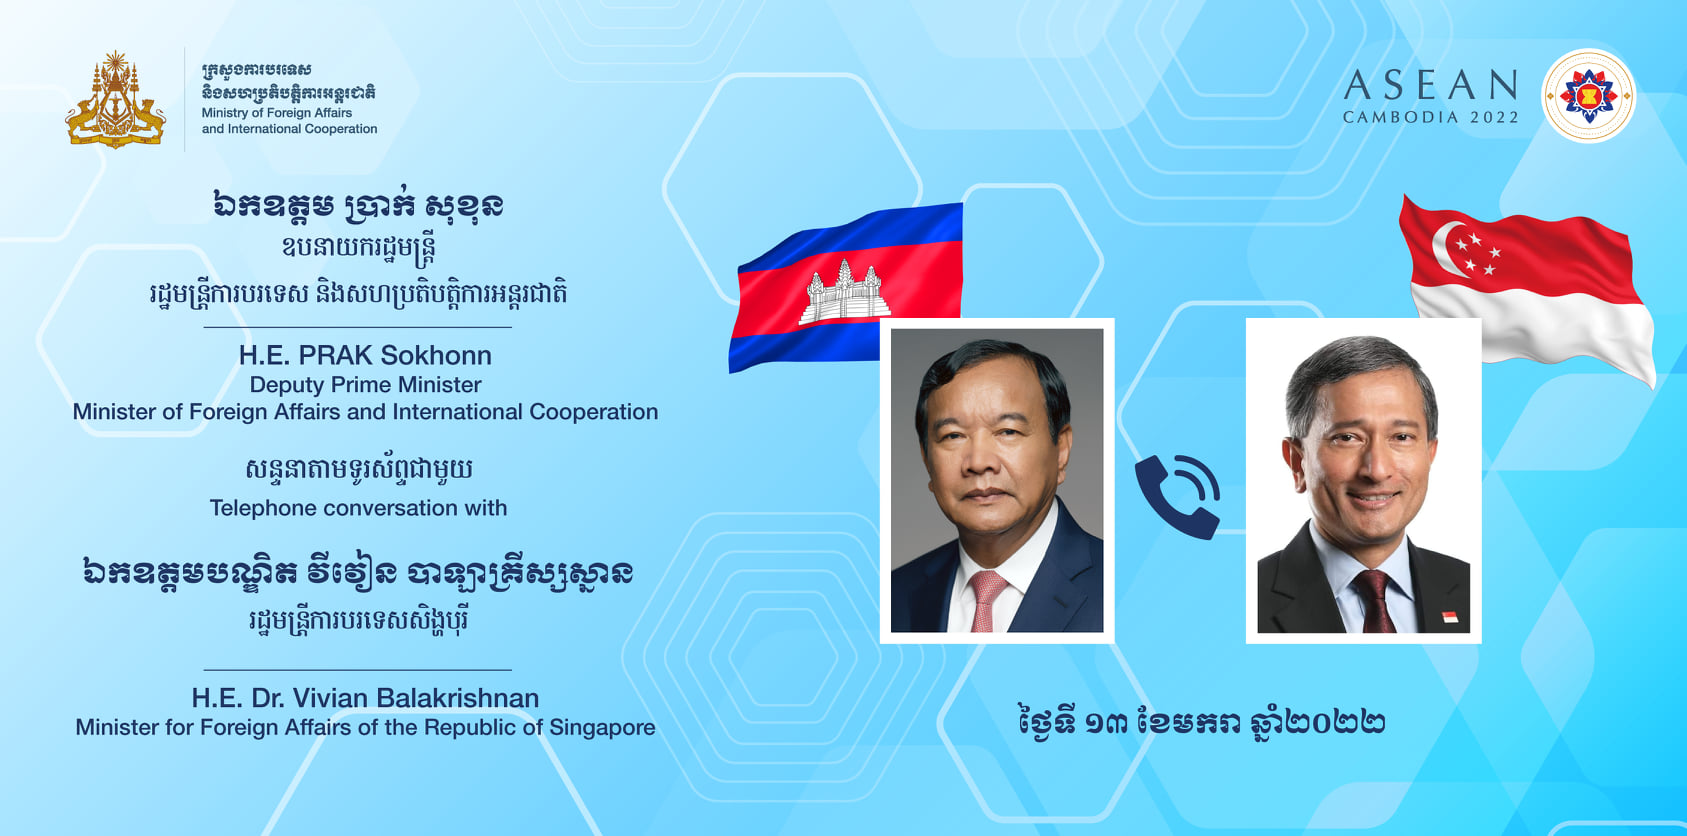 Outcomes of the Telephone Conversation between His Excellency PRAK Sokhonn, Deputy Prime Minister, Minister of Foreign Affairs and International Coopeartion of the Kingdom of Cambodia, and His Excellency Dr. VIVIAN Balakrishnan, Minister for Foreign Affairs of Singapore, 13 January 2022.